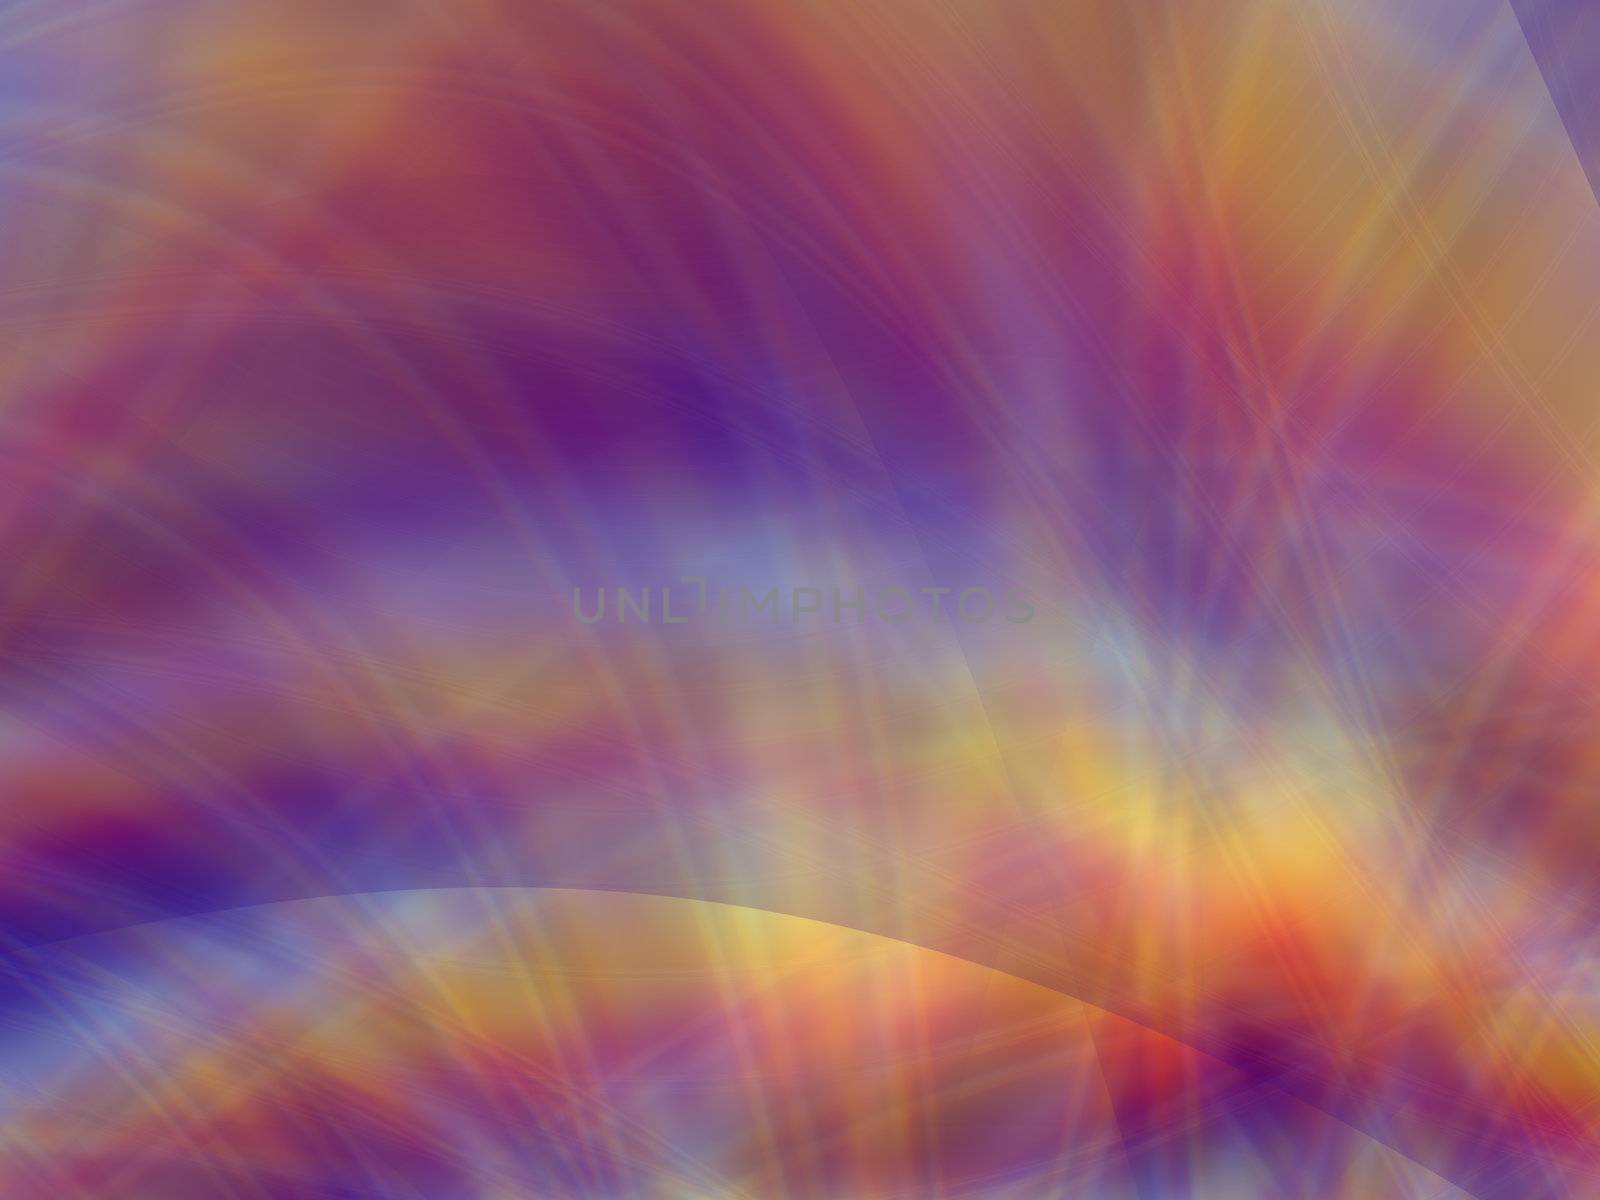 Fractal background with nice smooth rainbow like colors